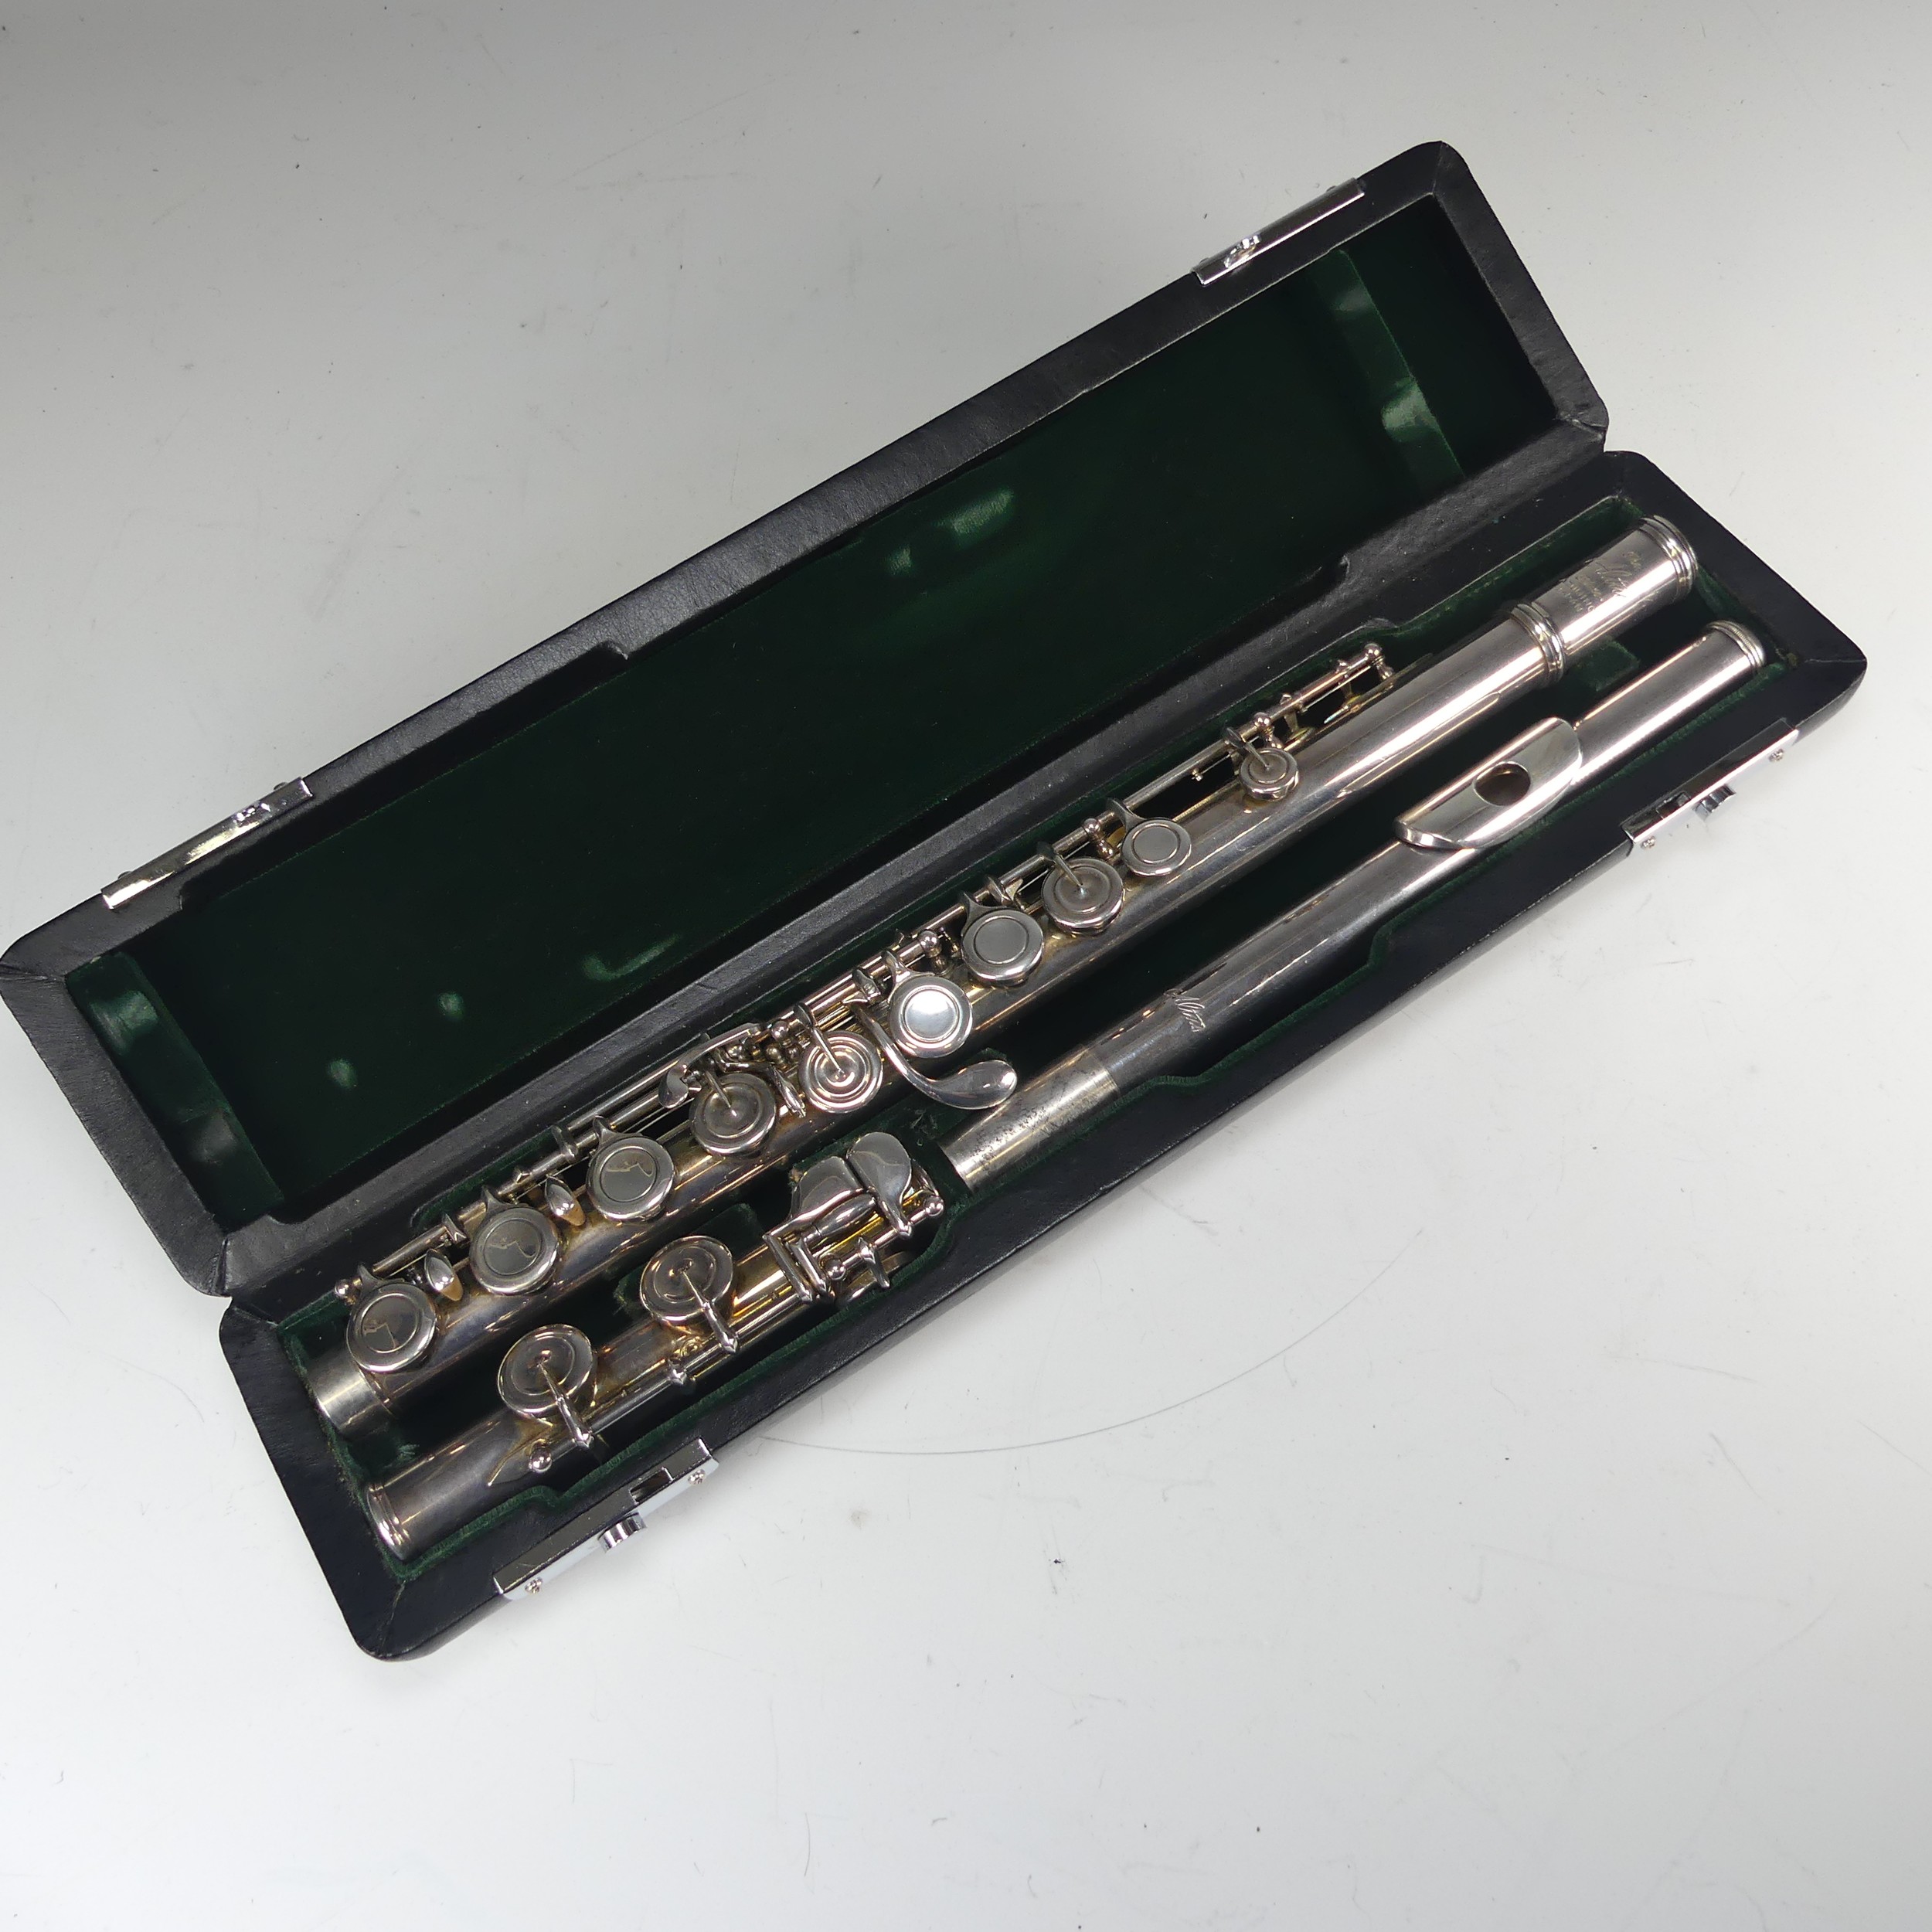 An Altus A907 Flute, with .900 silver headjoint and silver plated body, serial no. 007397, the - Image 9 of 11